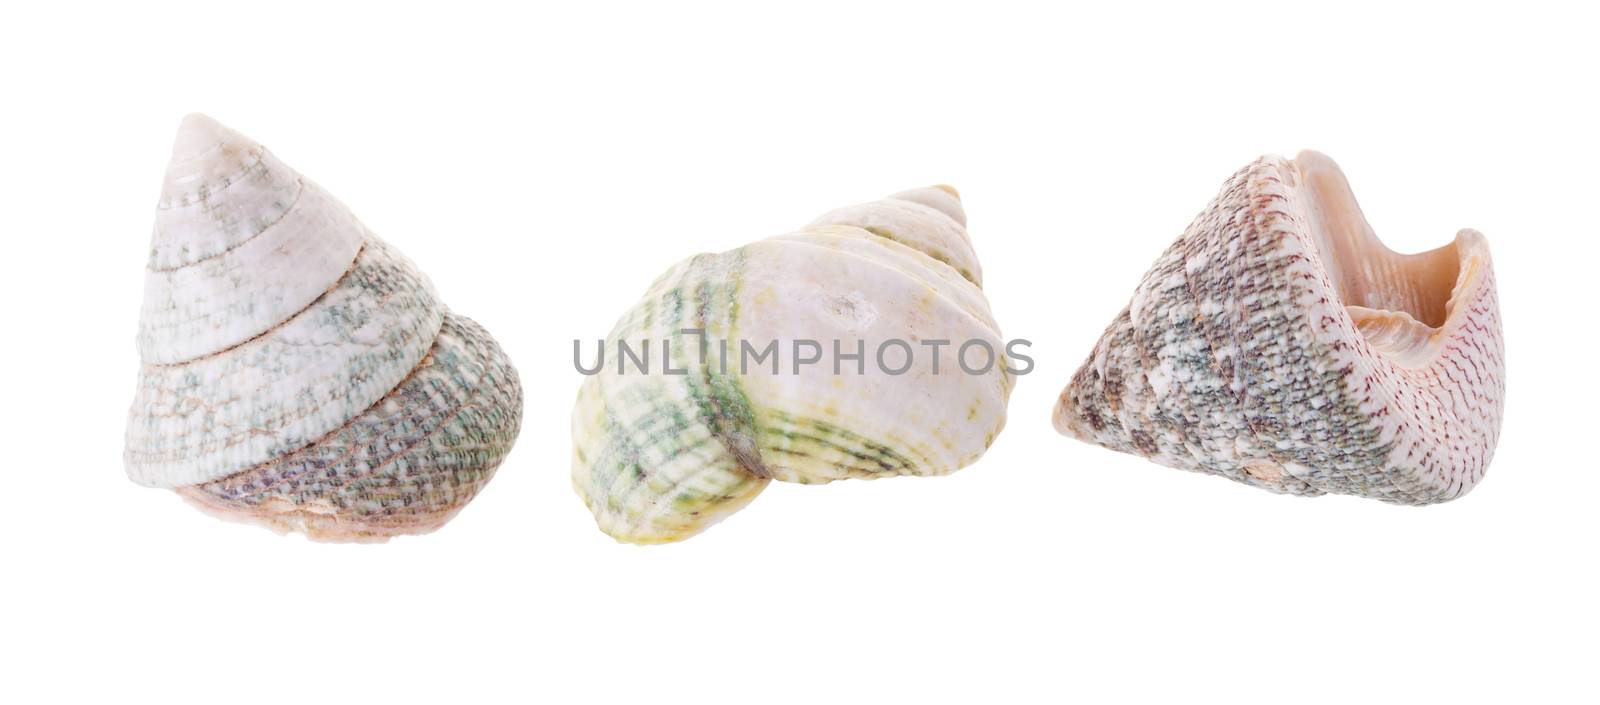 Sea shells arranged isolating on a white background by kaiskynet